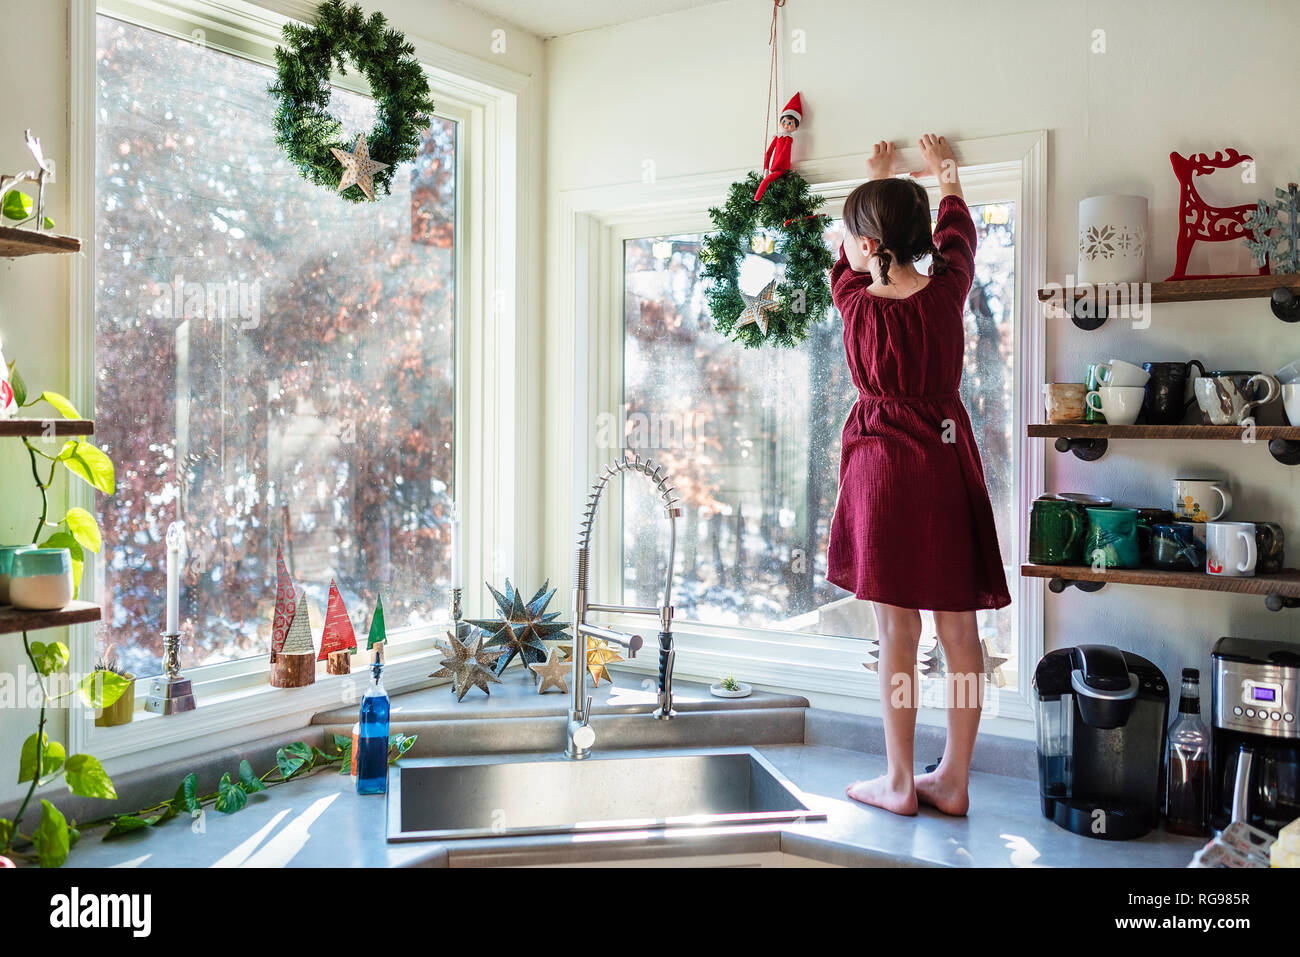 Girl standing on a kitchen worktop putting up Christmas decorations Stock Photo